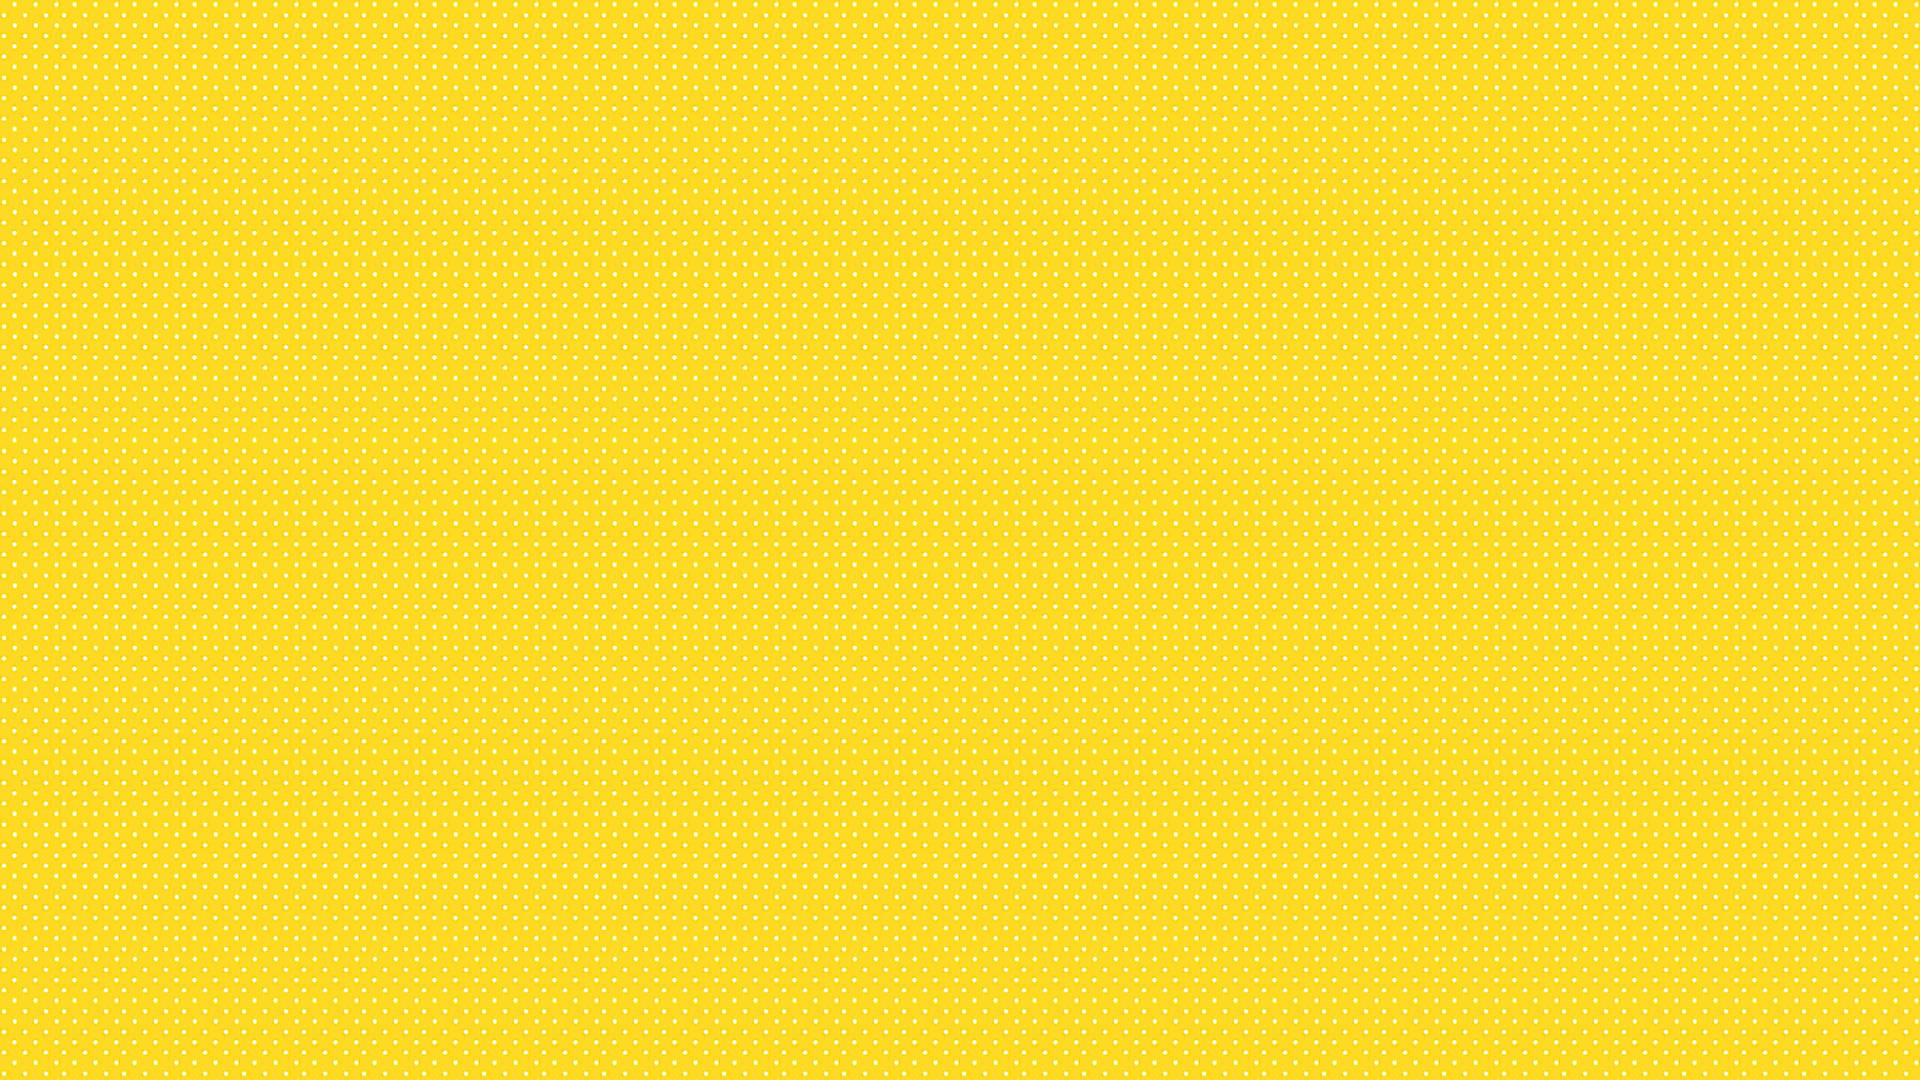 Plain Yellow With White Dots